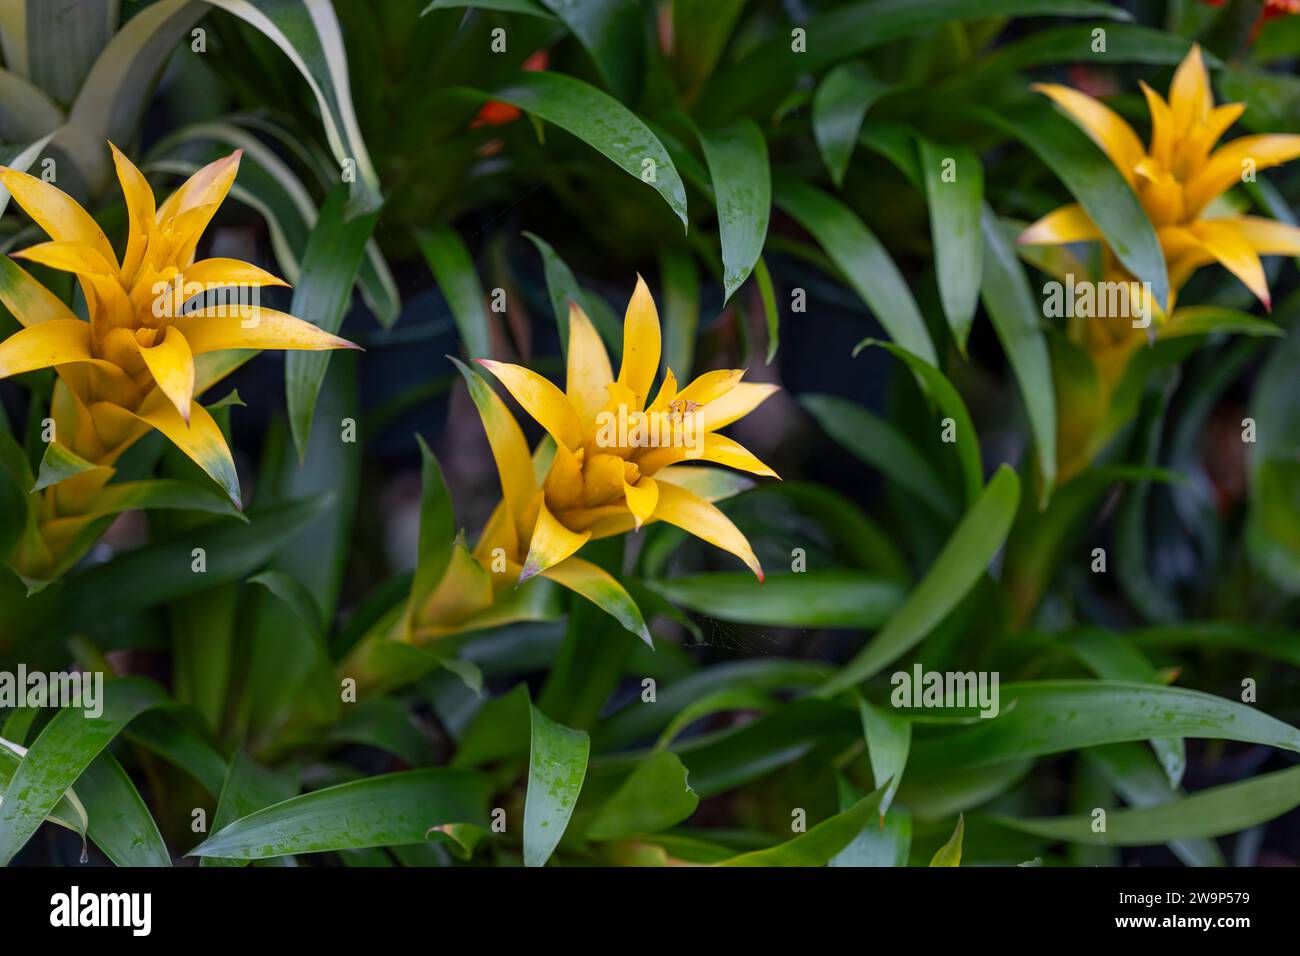 Canistropsis billbergioides, Bromeliad, yellow flower Stock Photo